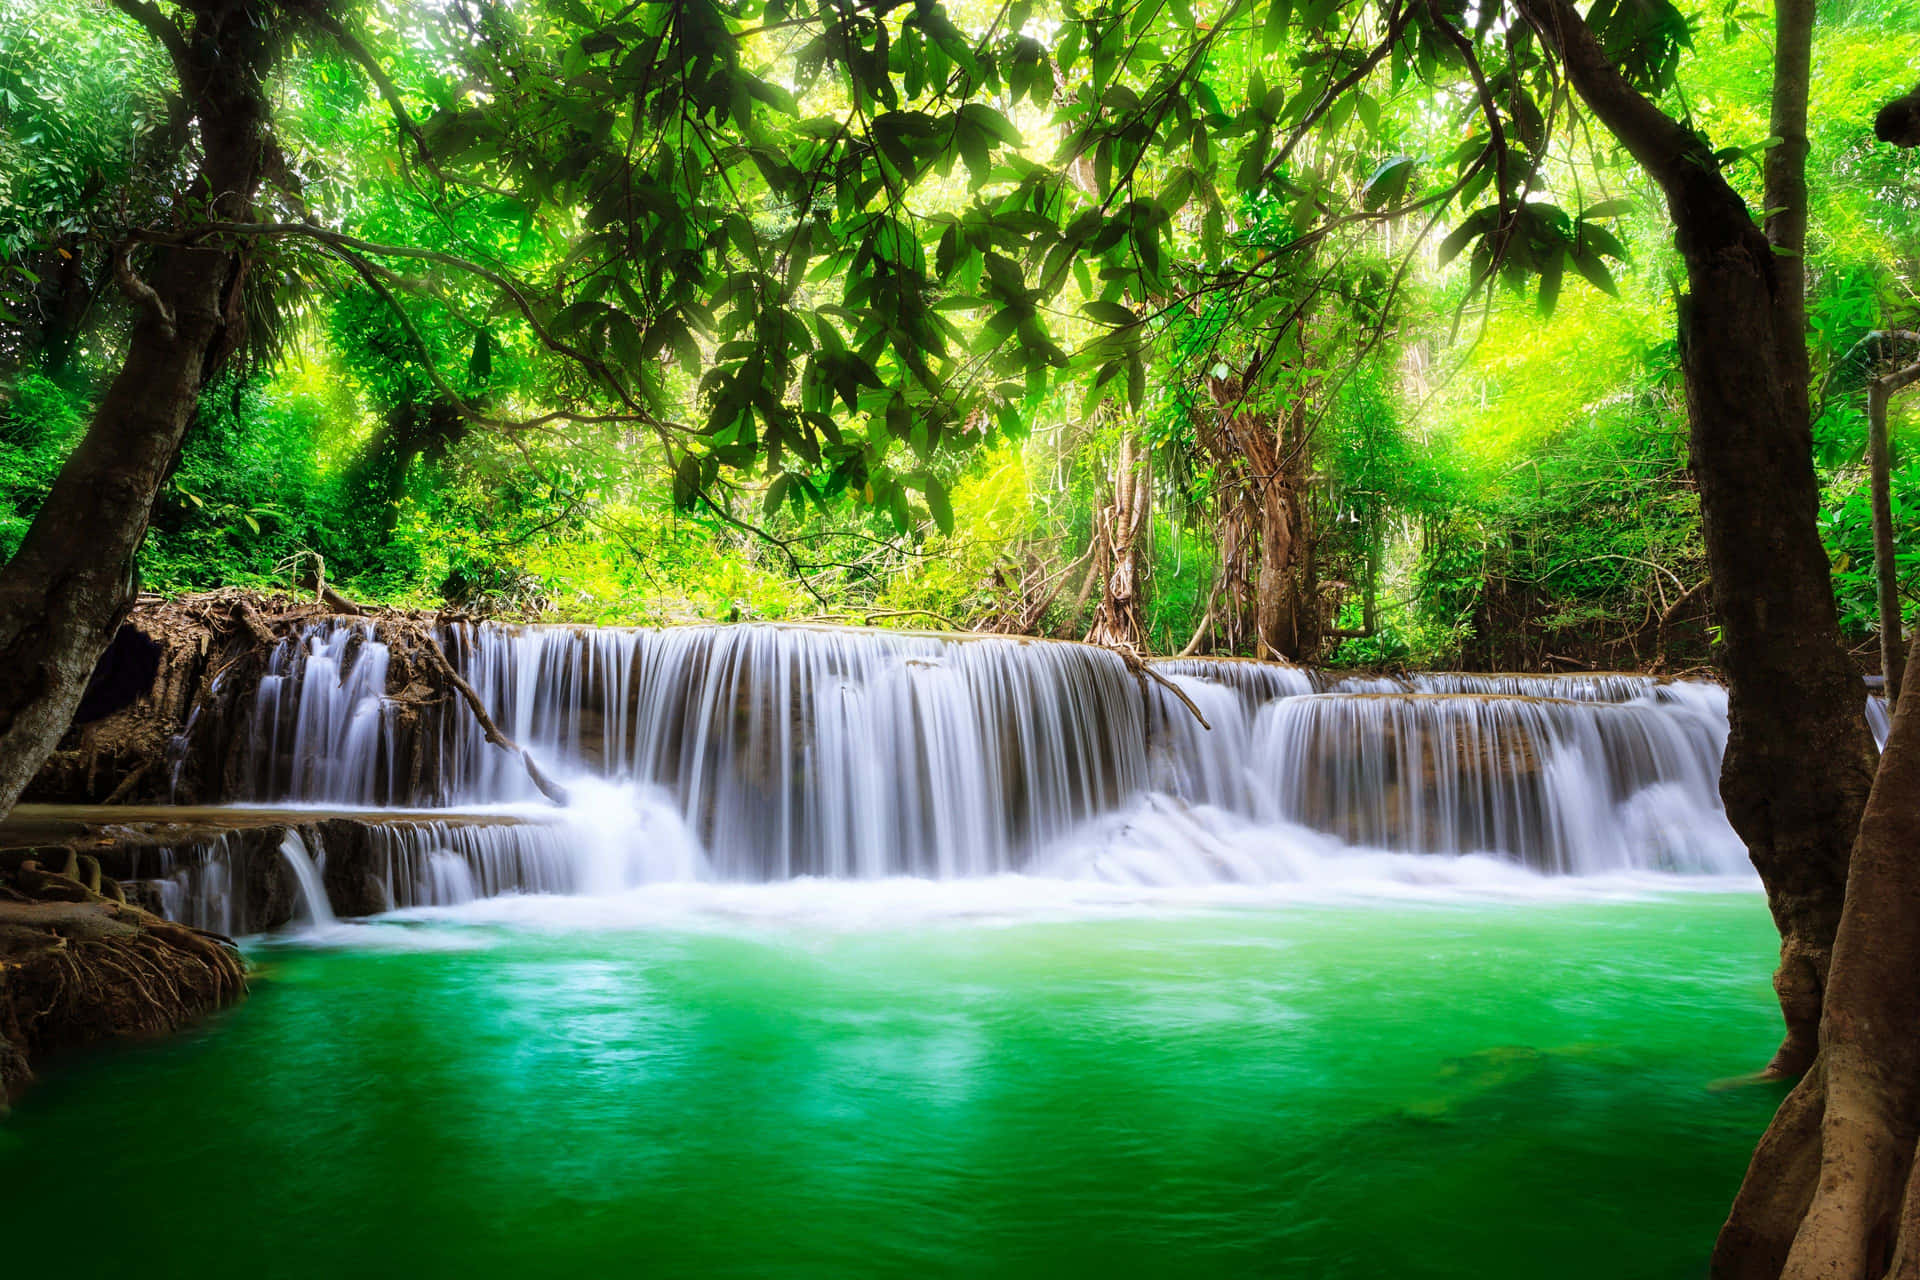 Water gushing out from a natural spring in the forest Wallpaper